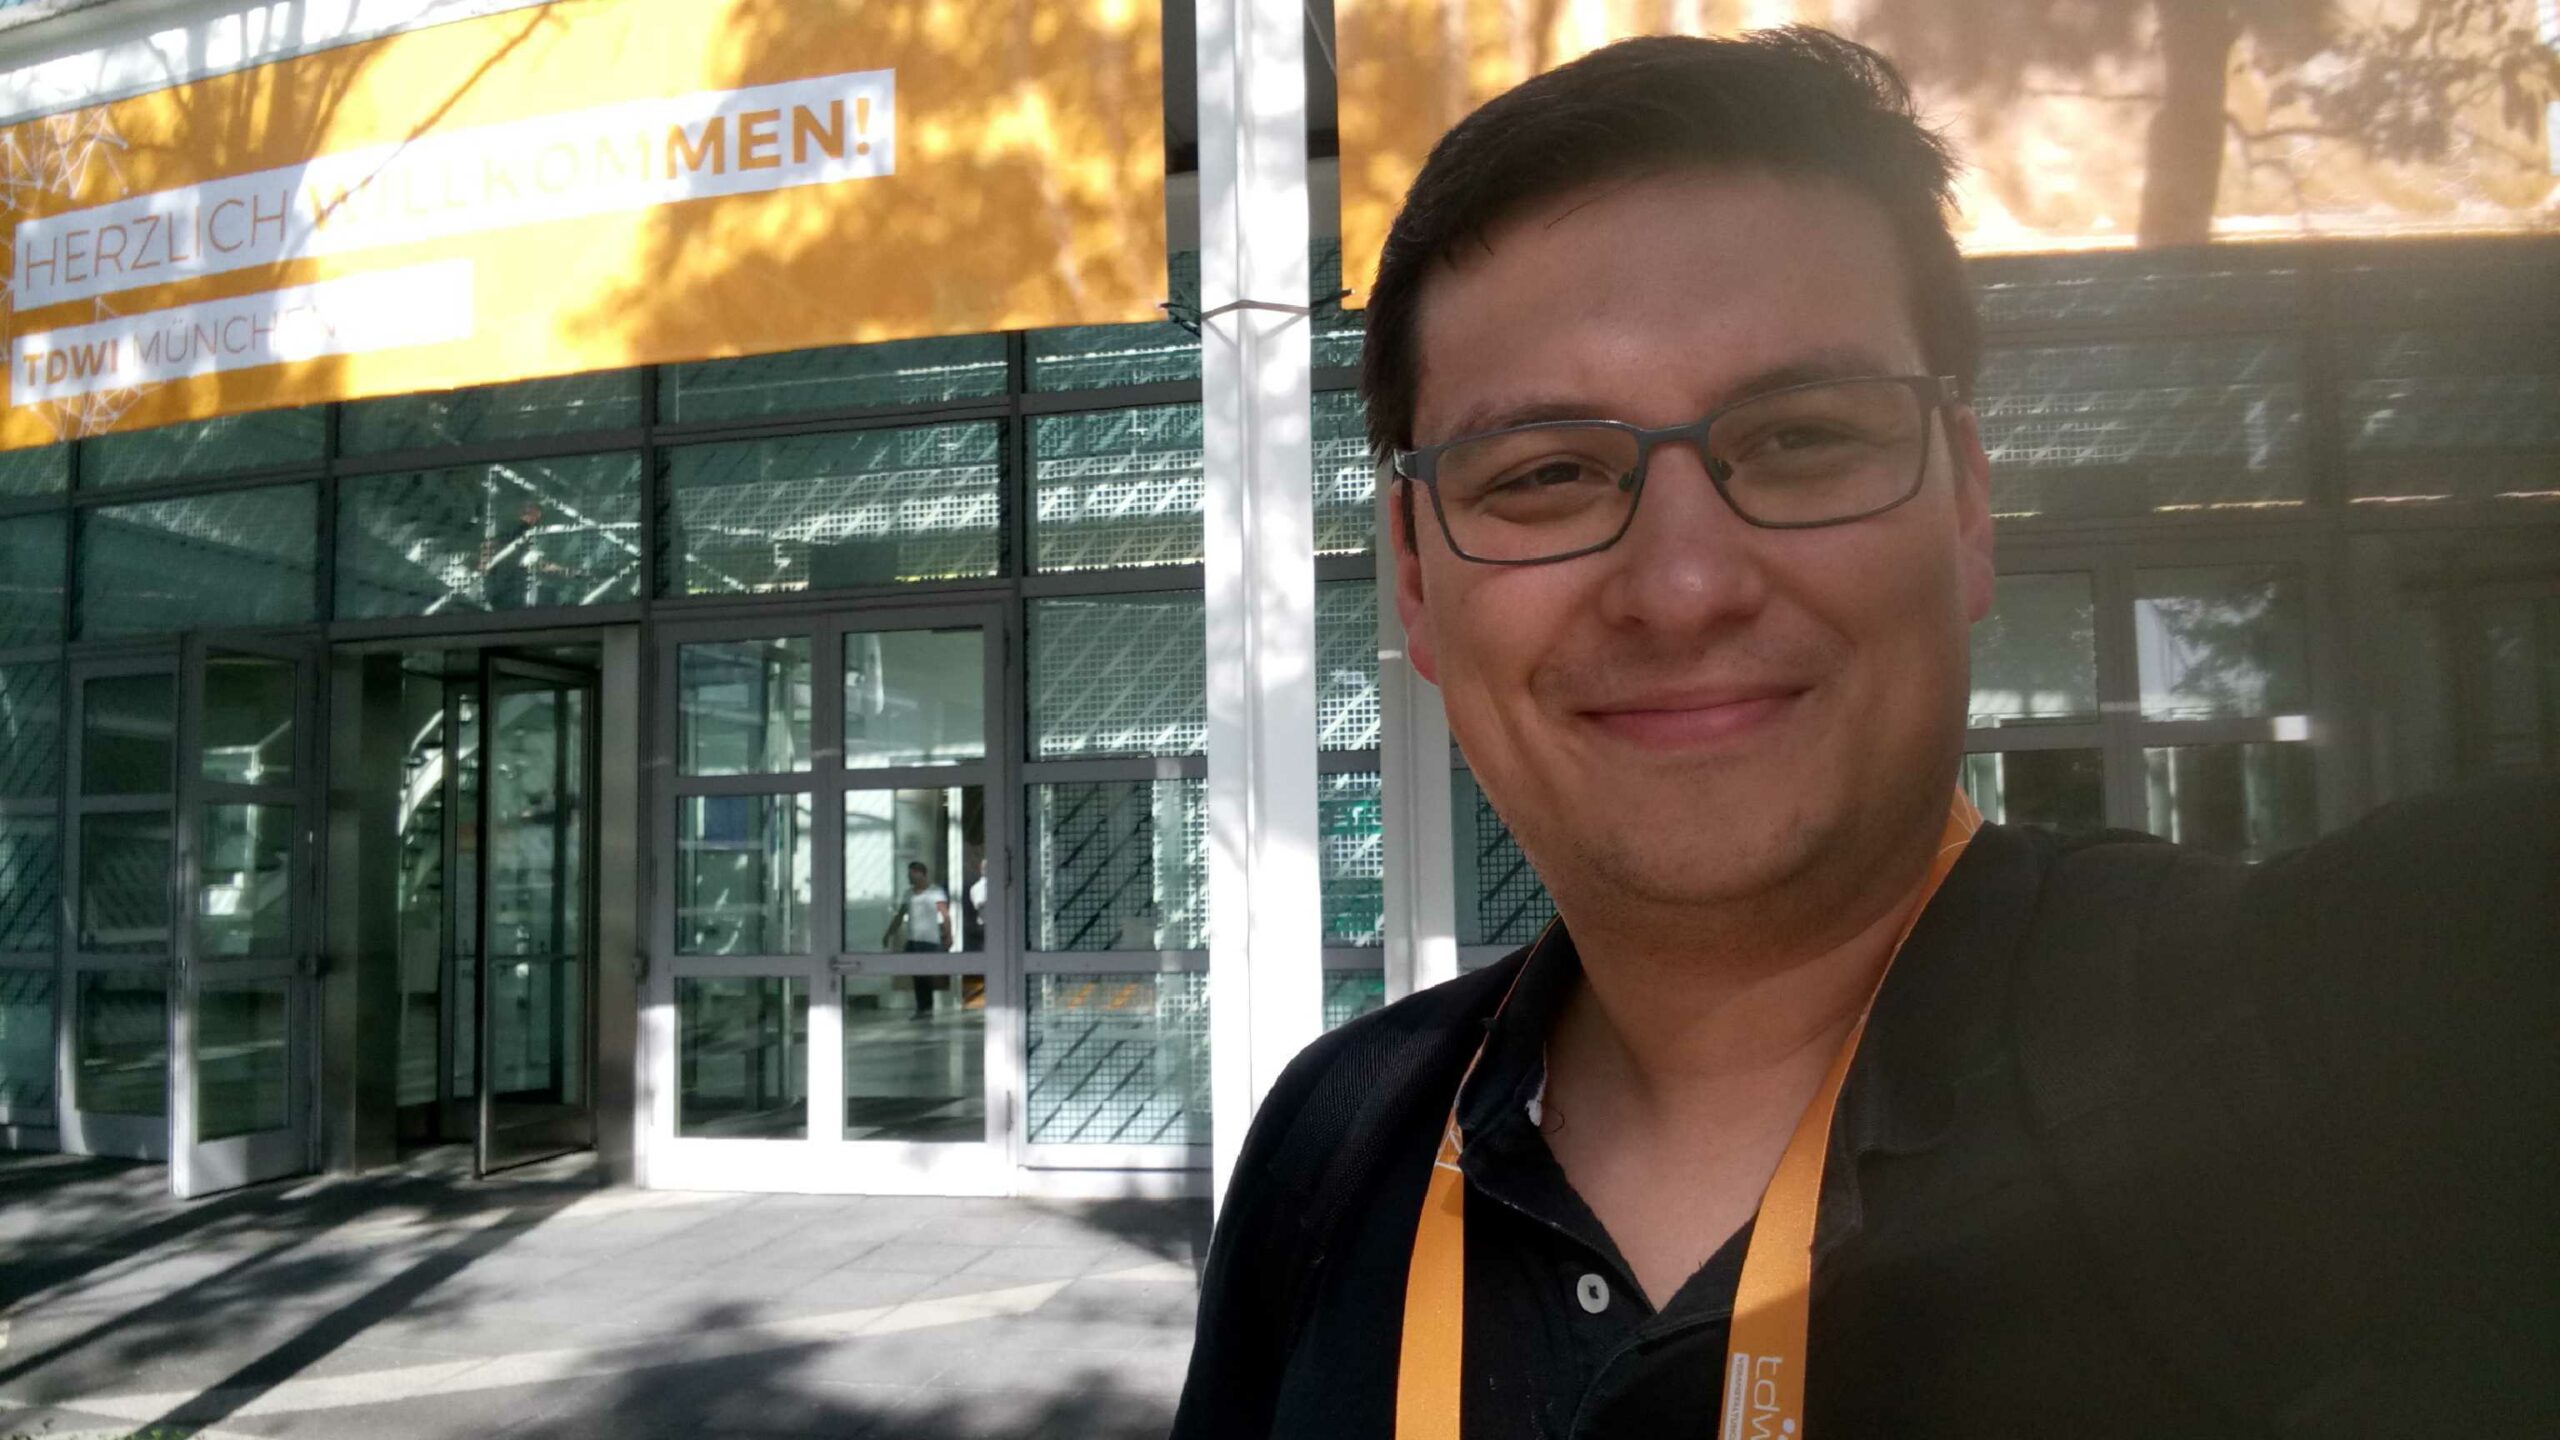 david chang founder and ceo of abis at the tdwi conference in munich 2019